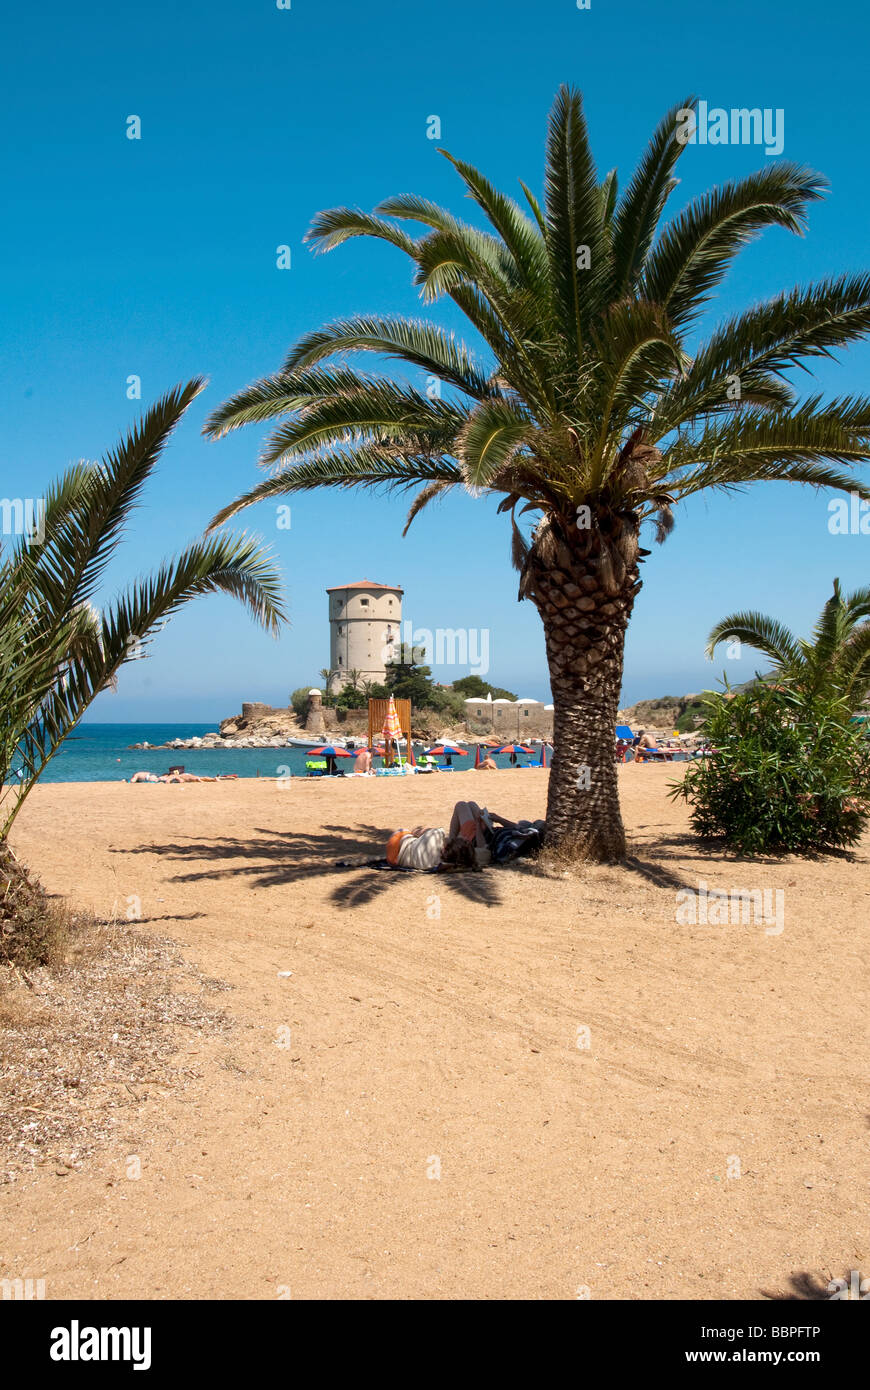 A couple laze reading books in the shade of palm tree at Giglio Campese the beach on the Island of Giglio or Isola del Giglio Stock Photo